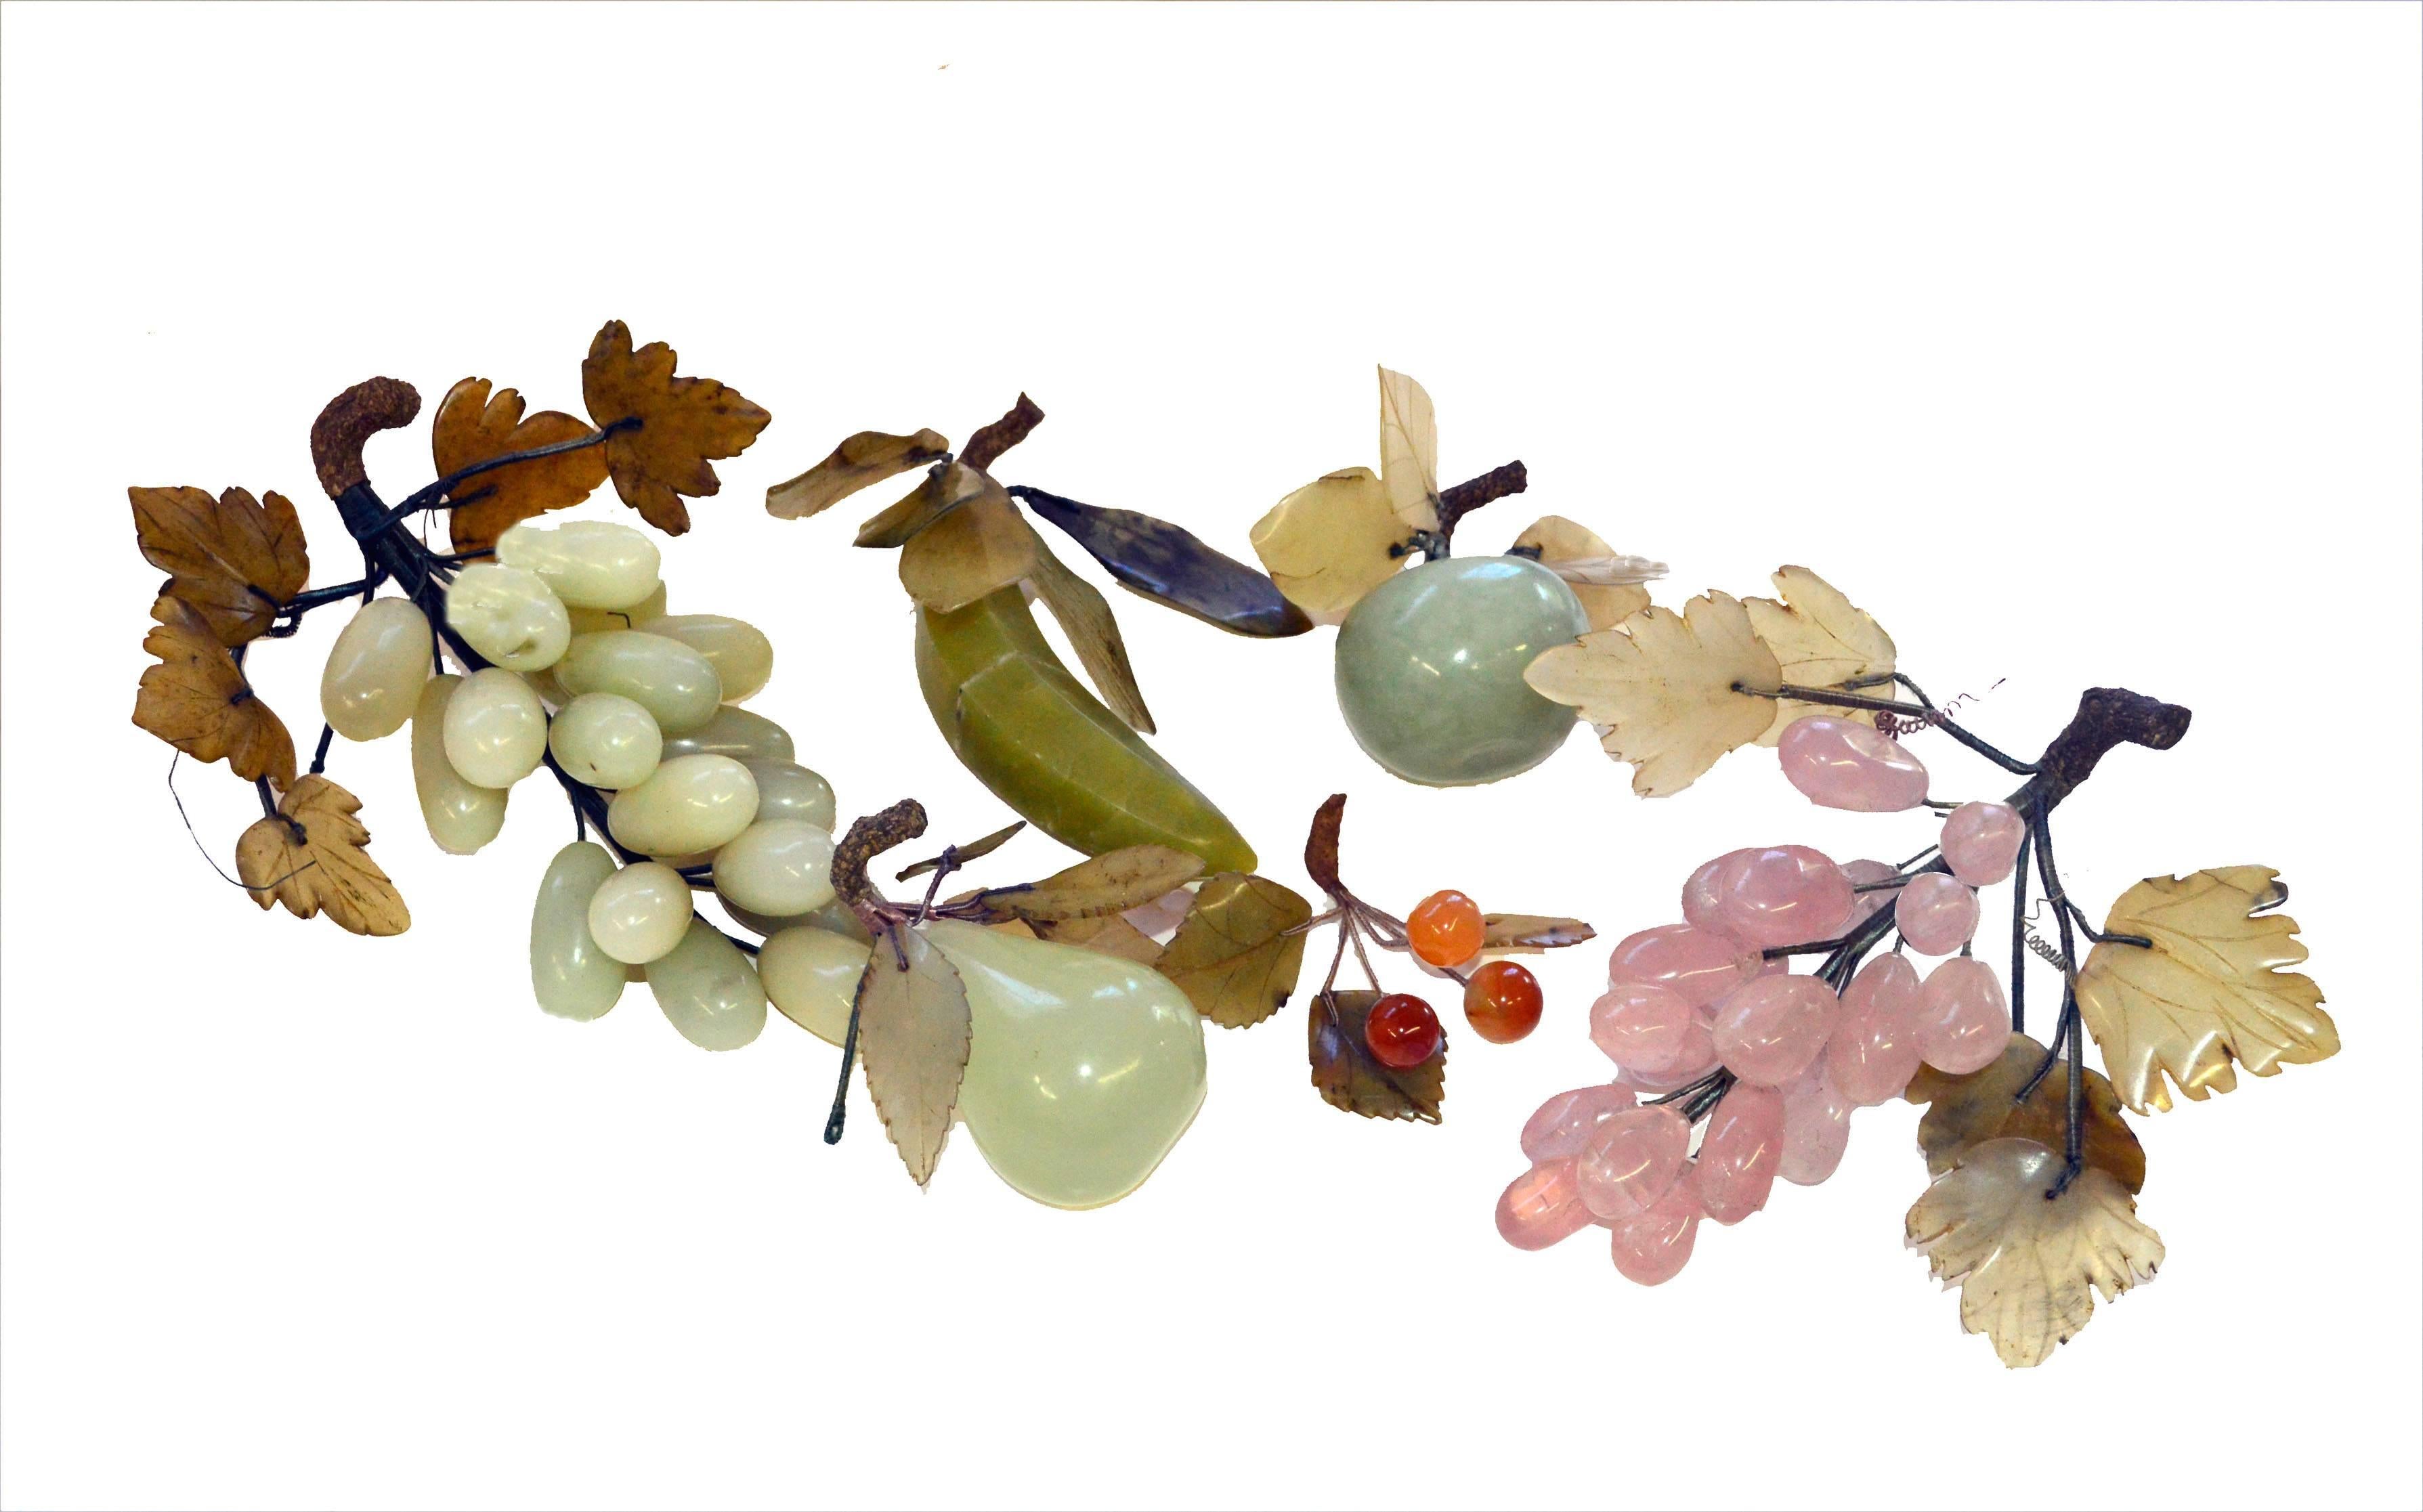 Grouping of two bunches of carved semi-precious stone grapes with jade leaves and wood stems. One bunch of grapes in Jade and one in Rose Quartz and a small bunch of cherries in Carnelian; also assorted fruit carved in semi-precious stone. Grouping